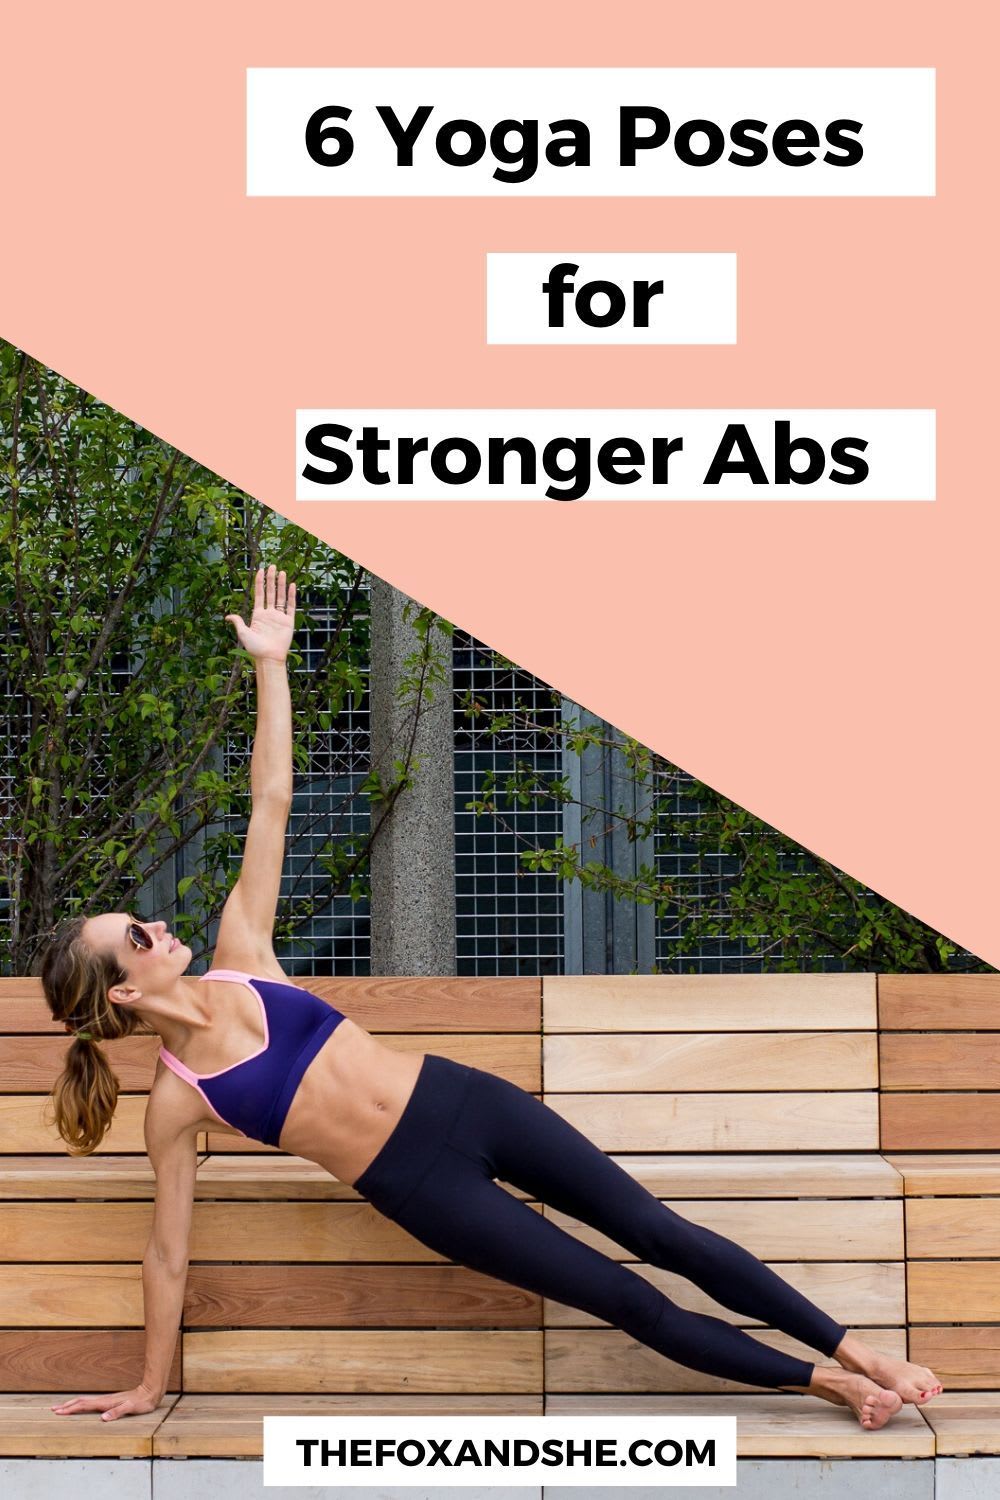 6 Yoga Poses for Strong Abs